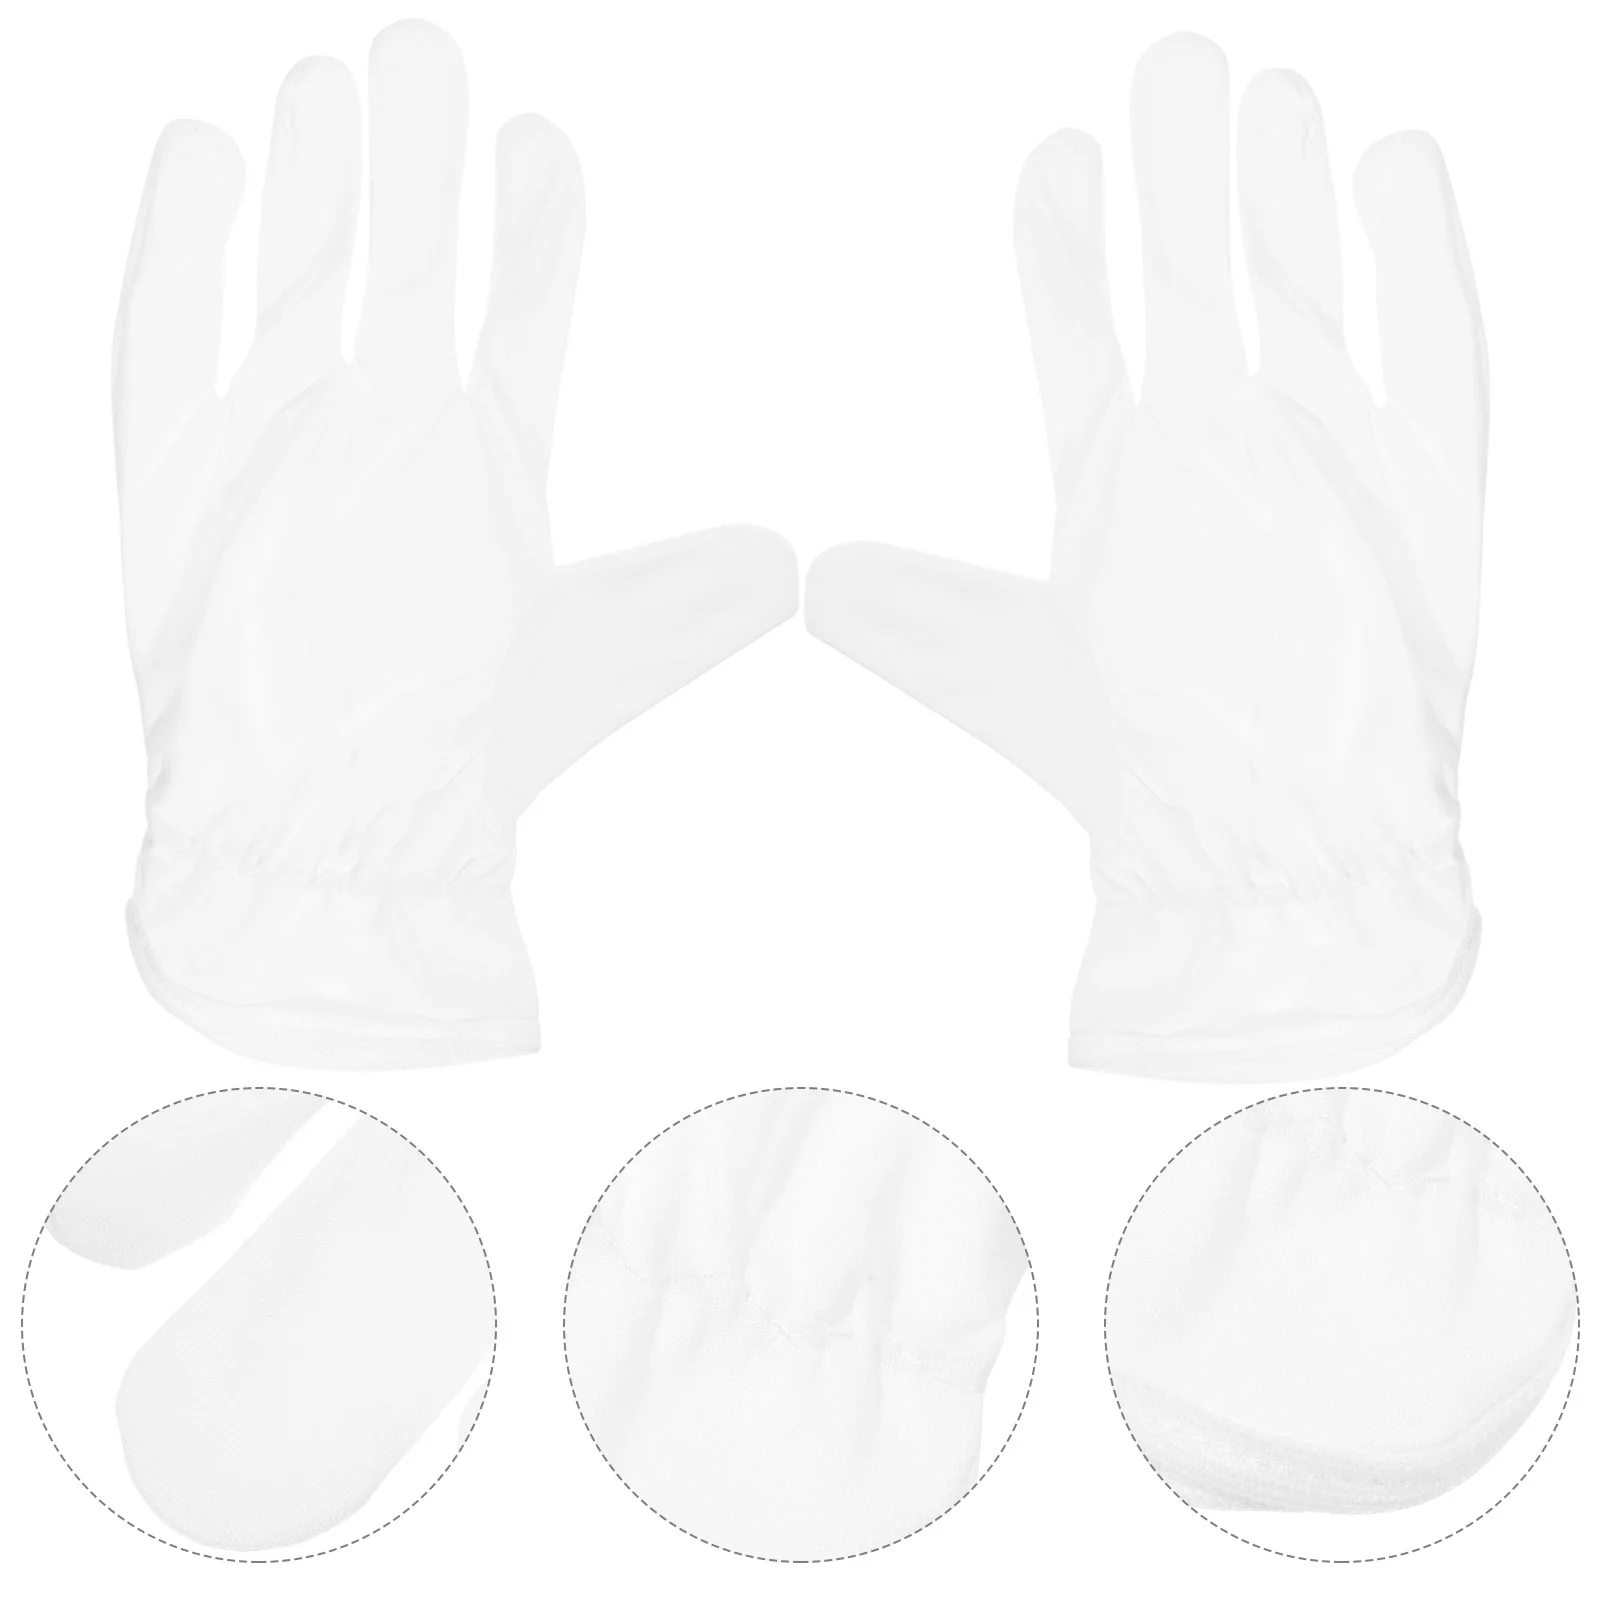 

6 Pairs Dust-free Gloves Work Jewelry Inspection Microfiber White for Women Miss Testing Kit